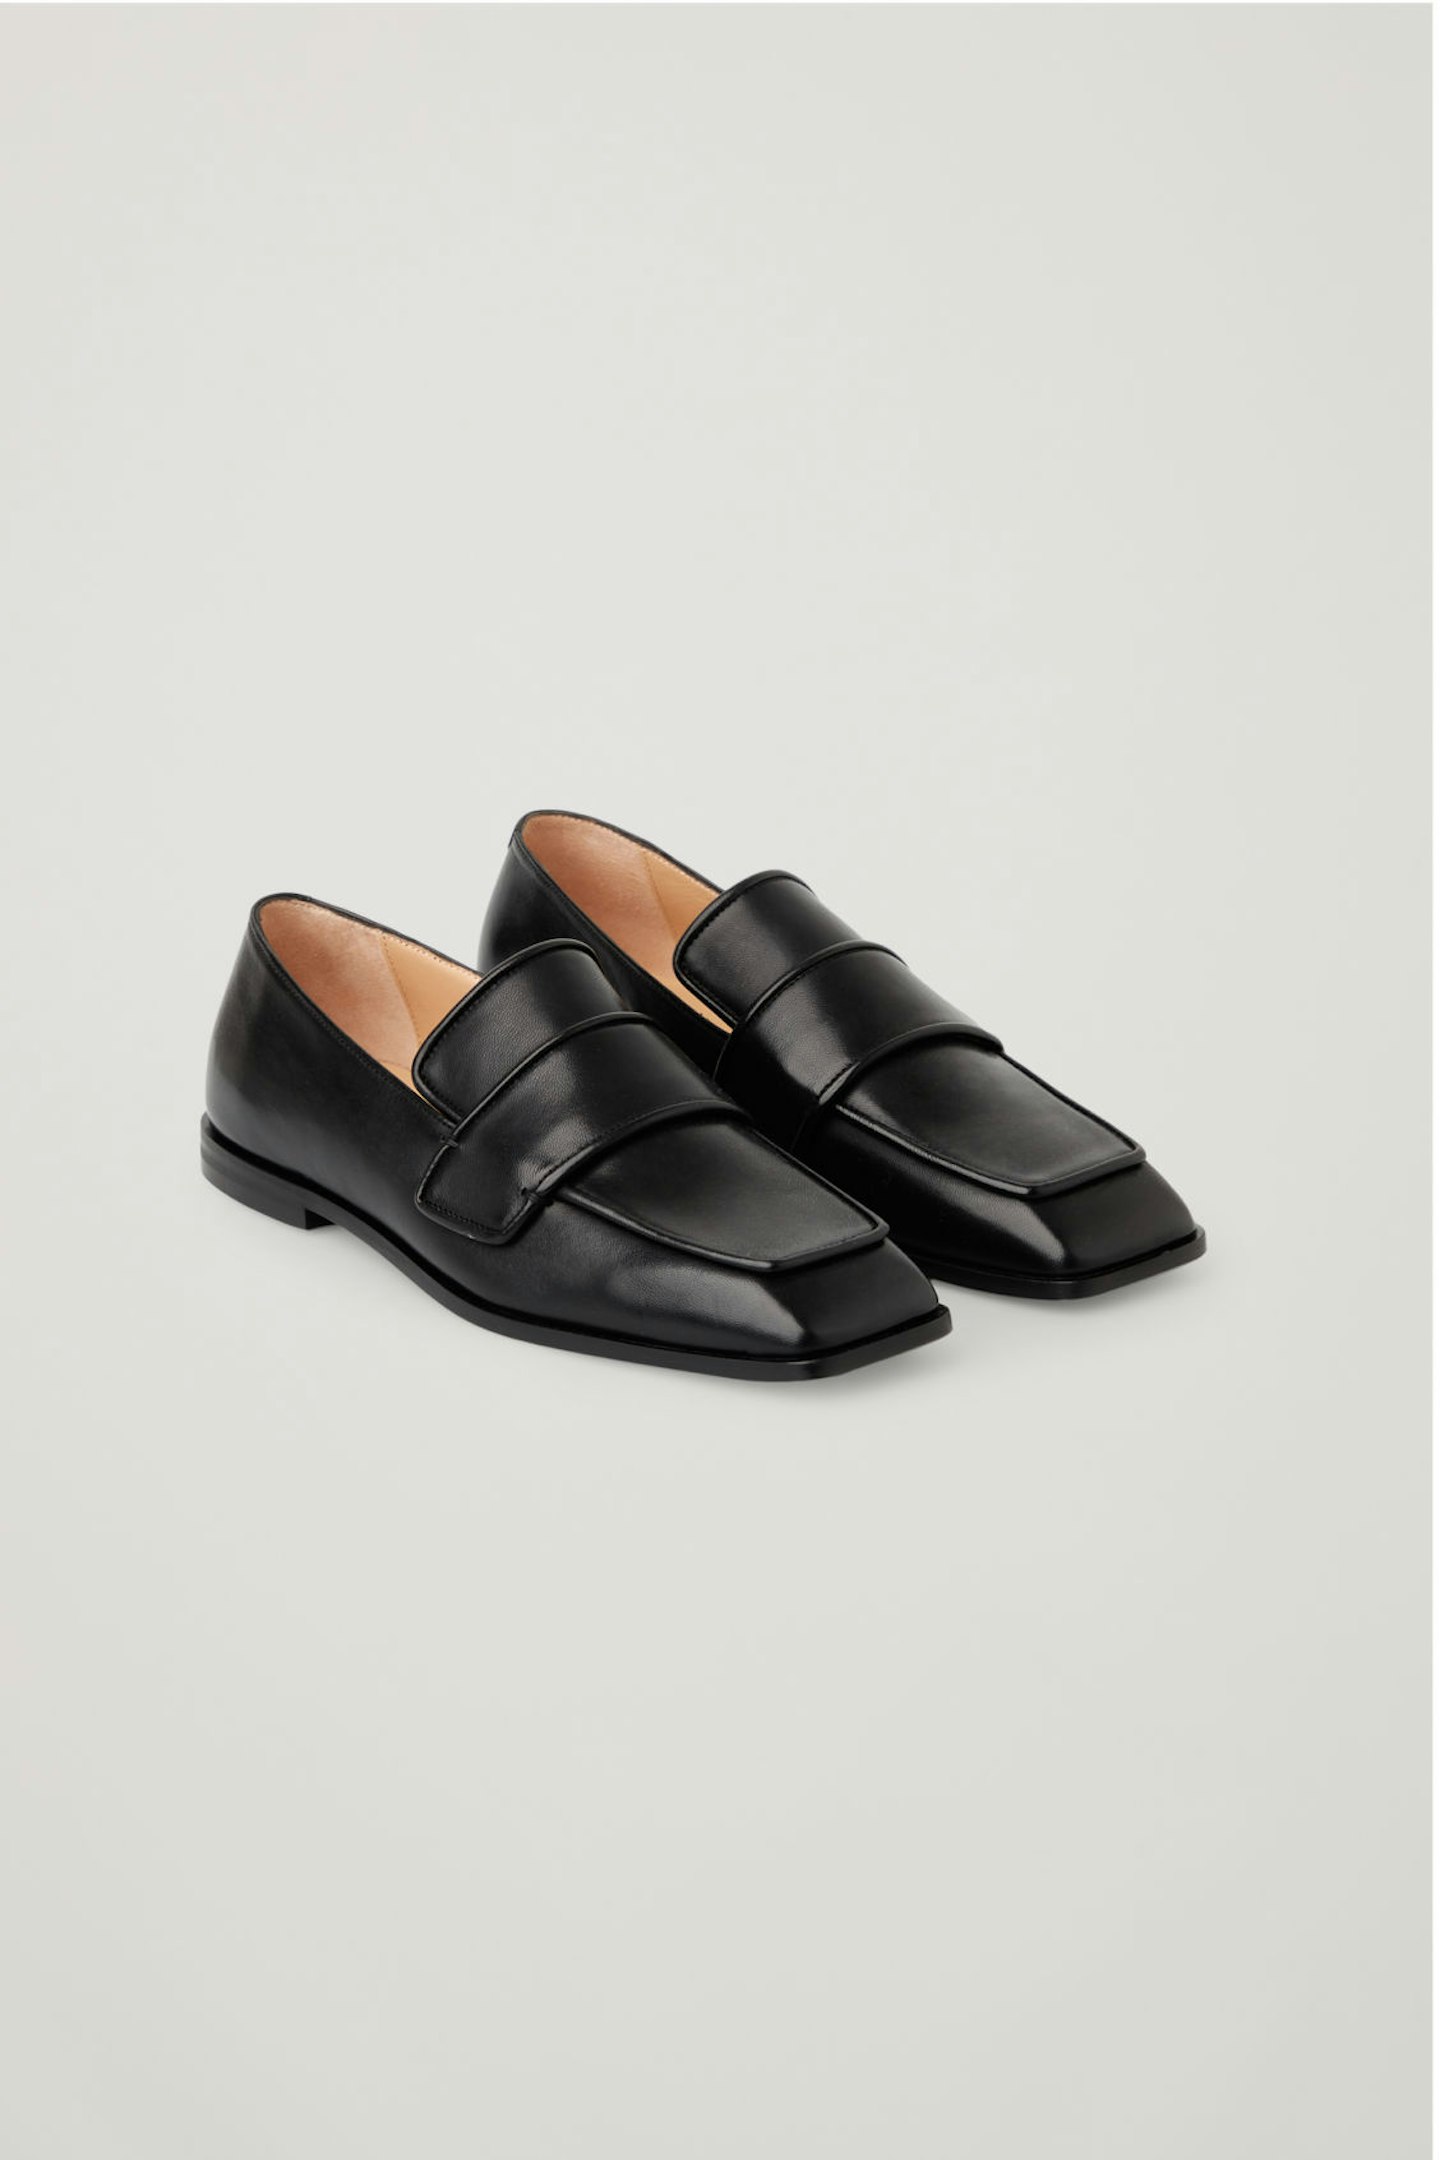 COS, Square Toe Leather Loafers, £135